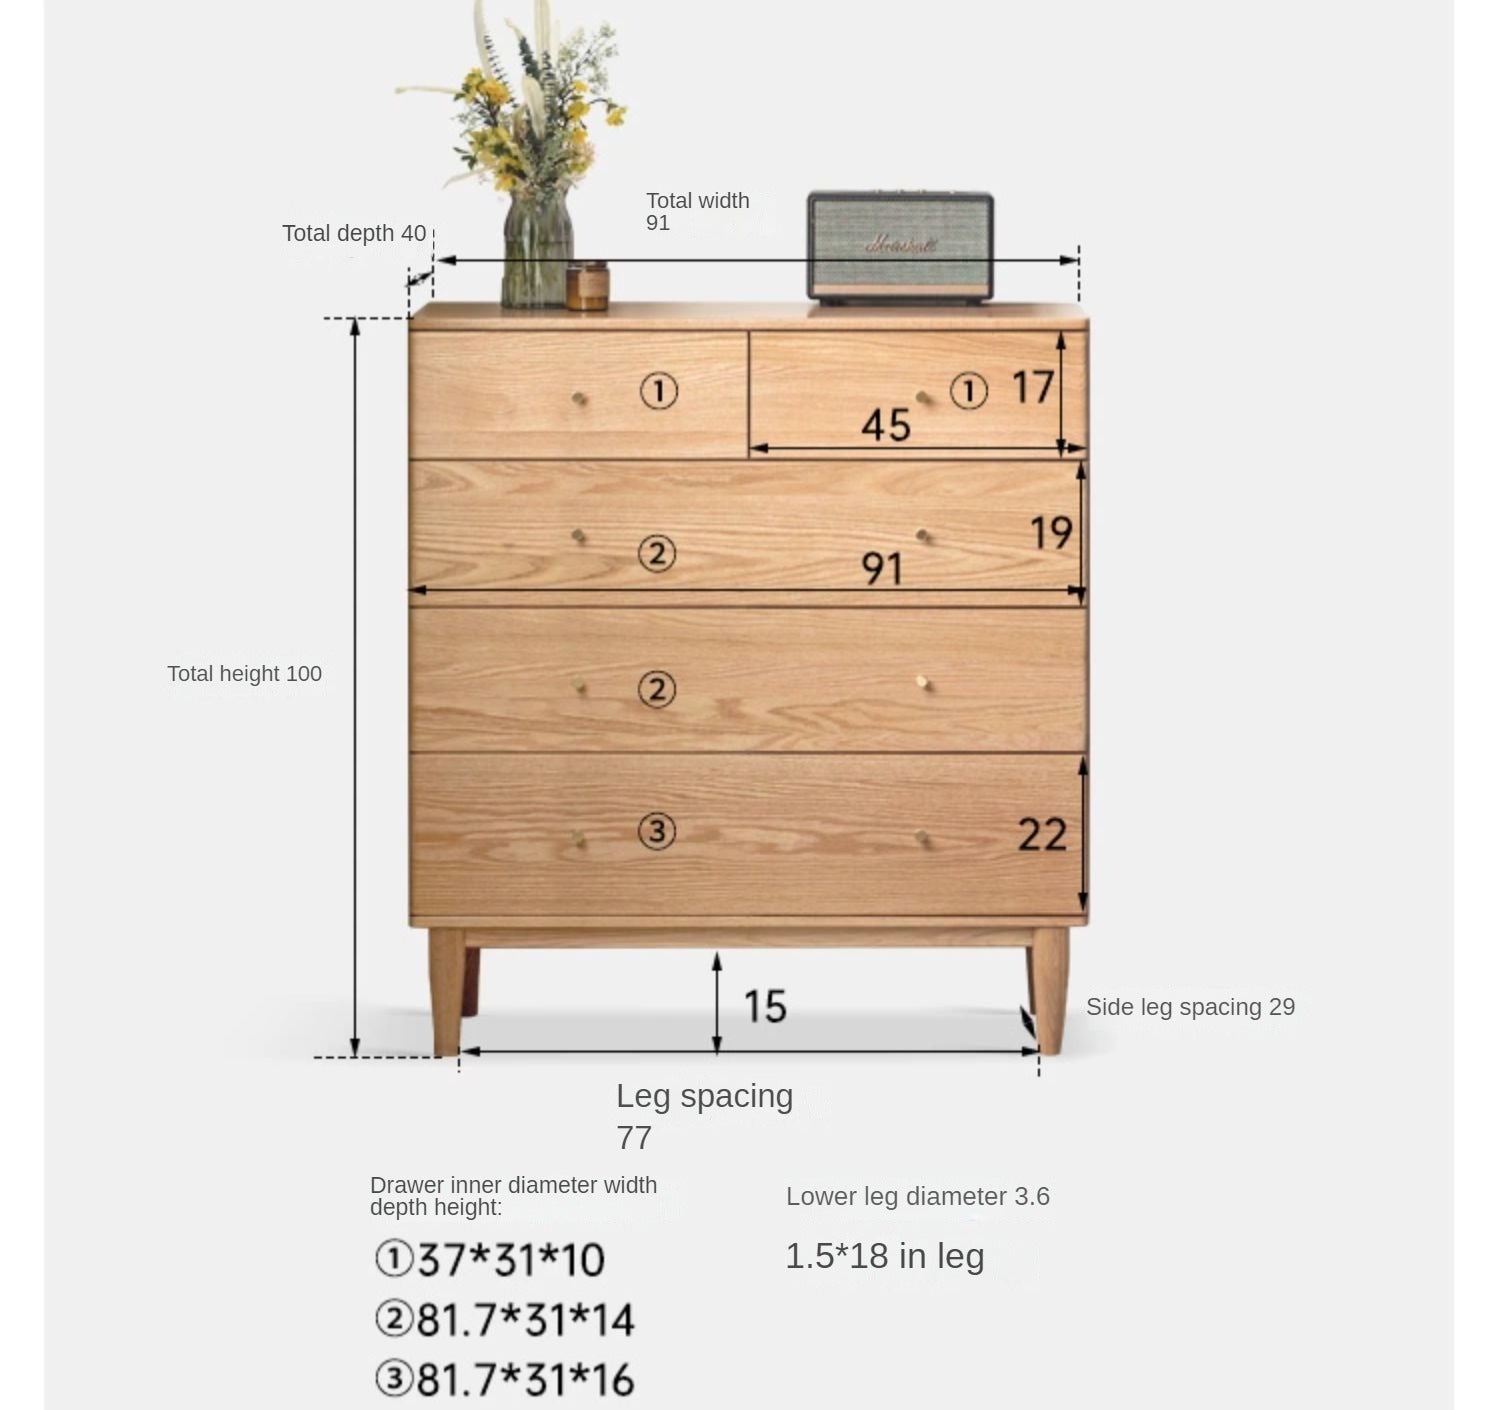 Oak solid wood chest of drawers bedroom "